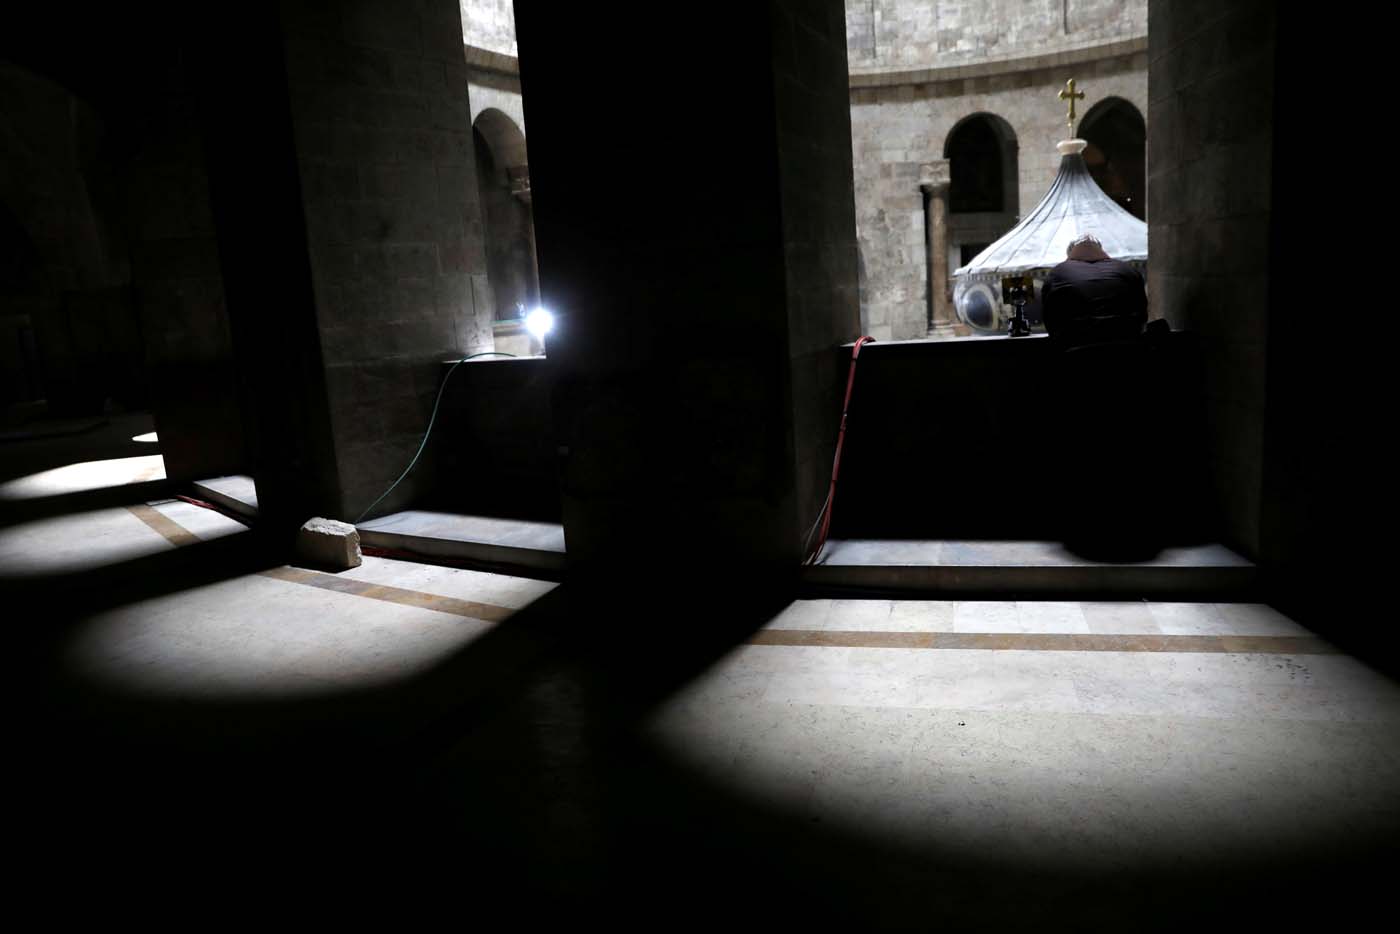 A priest looks down towards the newly restored Edicule, the ancient structure housing the tomb, which according to Christian belief is where Jesus's body was anointed and buried, at the Church of the Holy Sepulchre in Jerusalem's Old City March 20, 2017. REUTERS/Ronen Zvulun